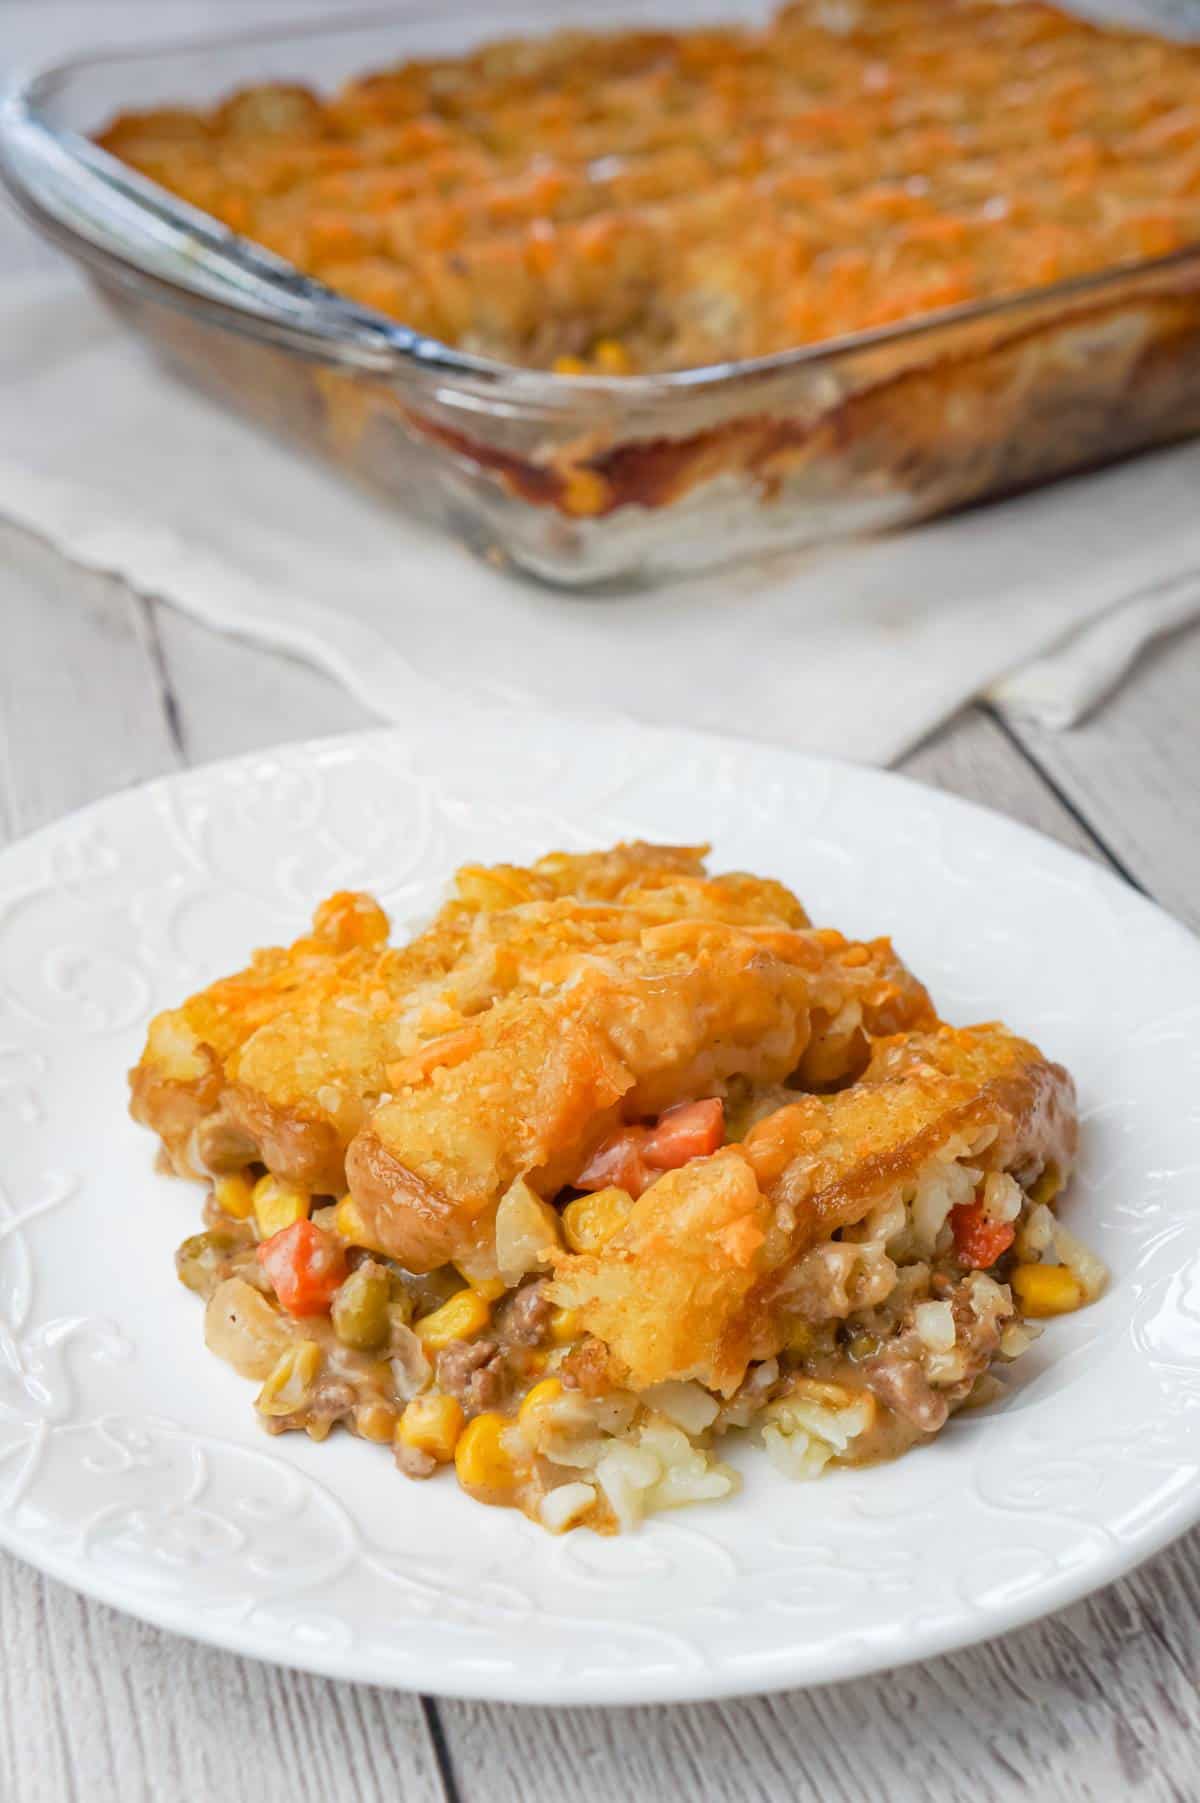 Tater Tot Hotdish is an easy ground beef casserole recipe loaded with canned veggies, cream of mushroom soup, cheddar cheese and topped with tater tots.